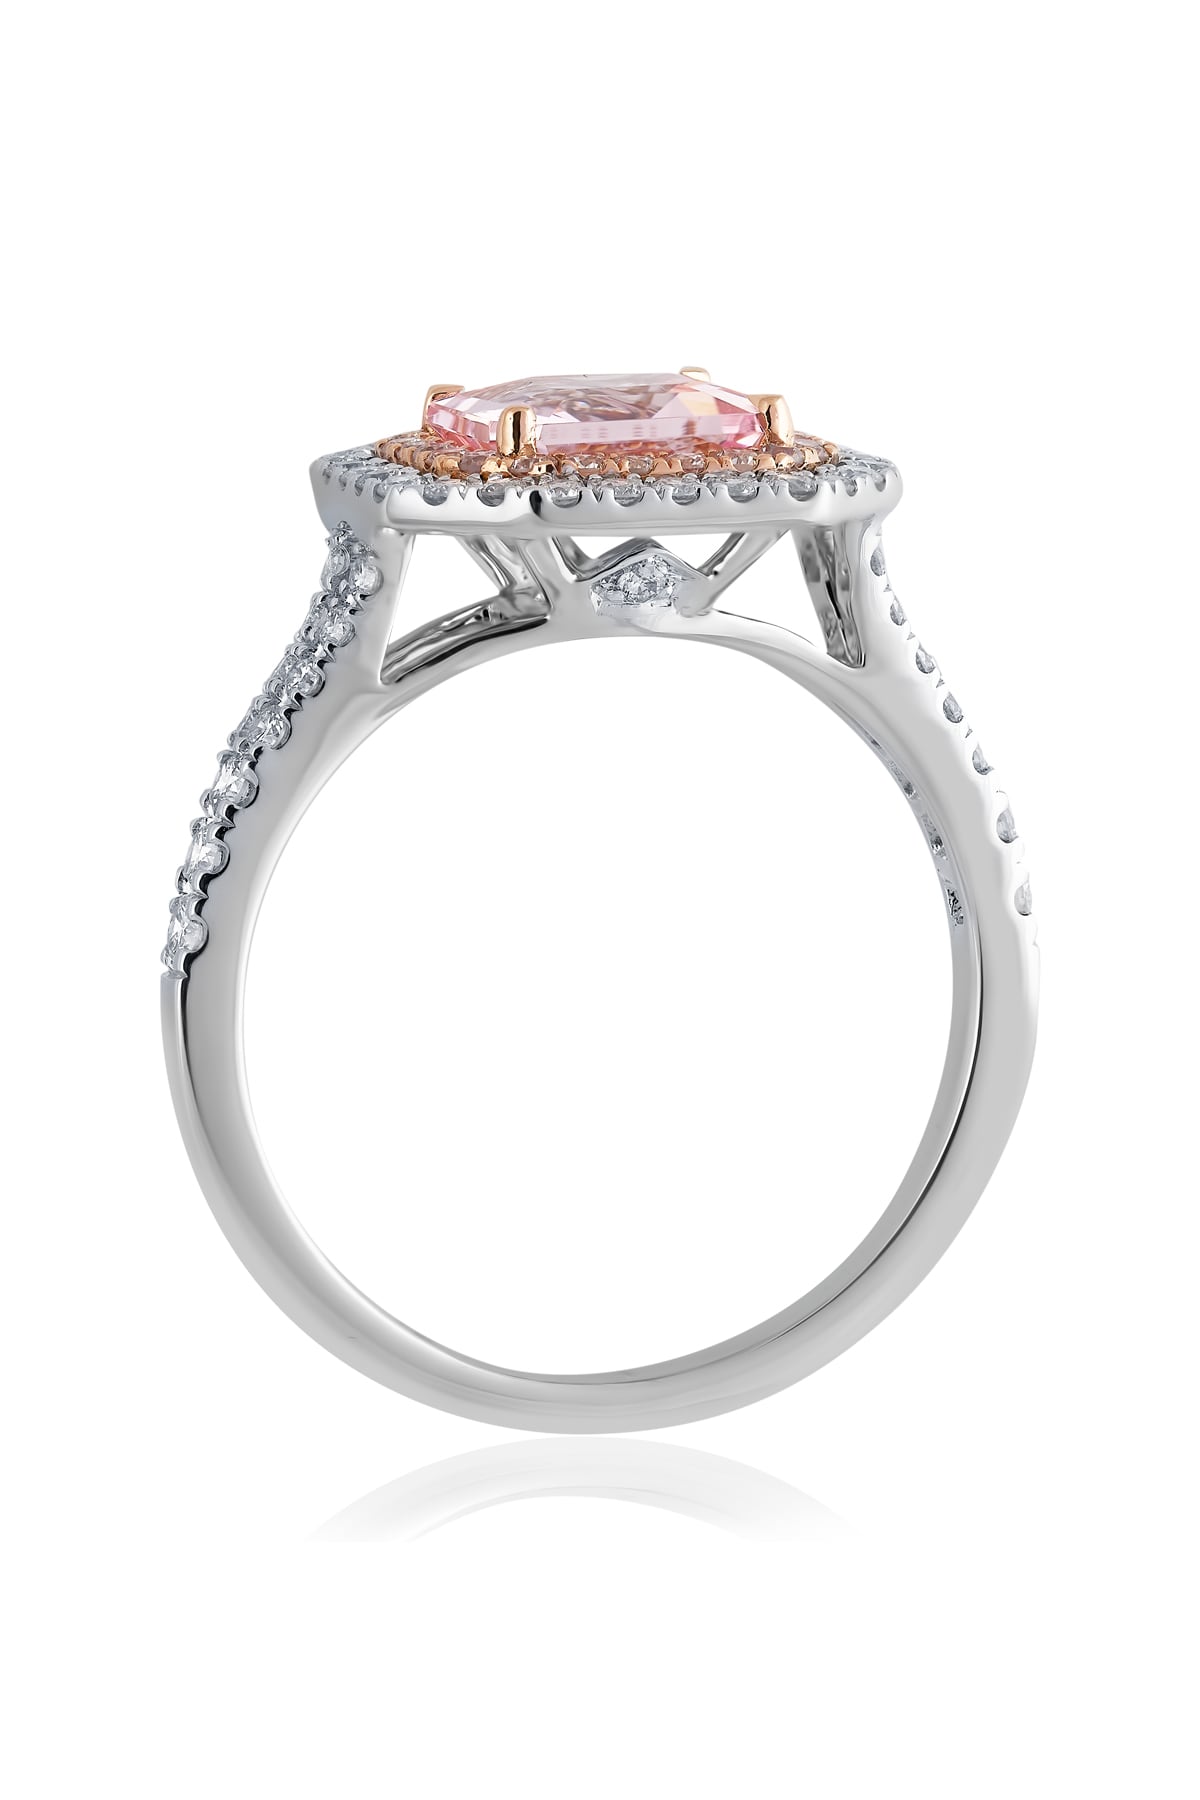 Square Asscher Cut Pink Morganite & Diamond Halo Ring from LeGassick Jewellery.